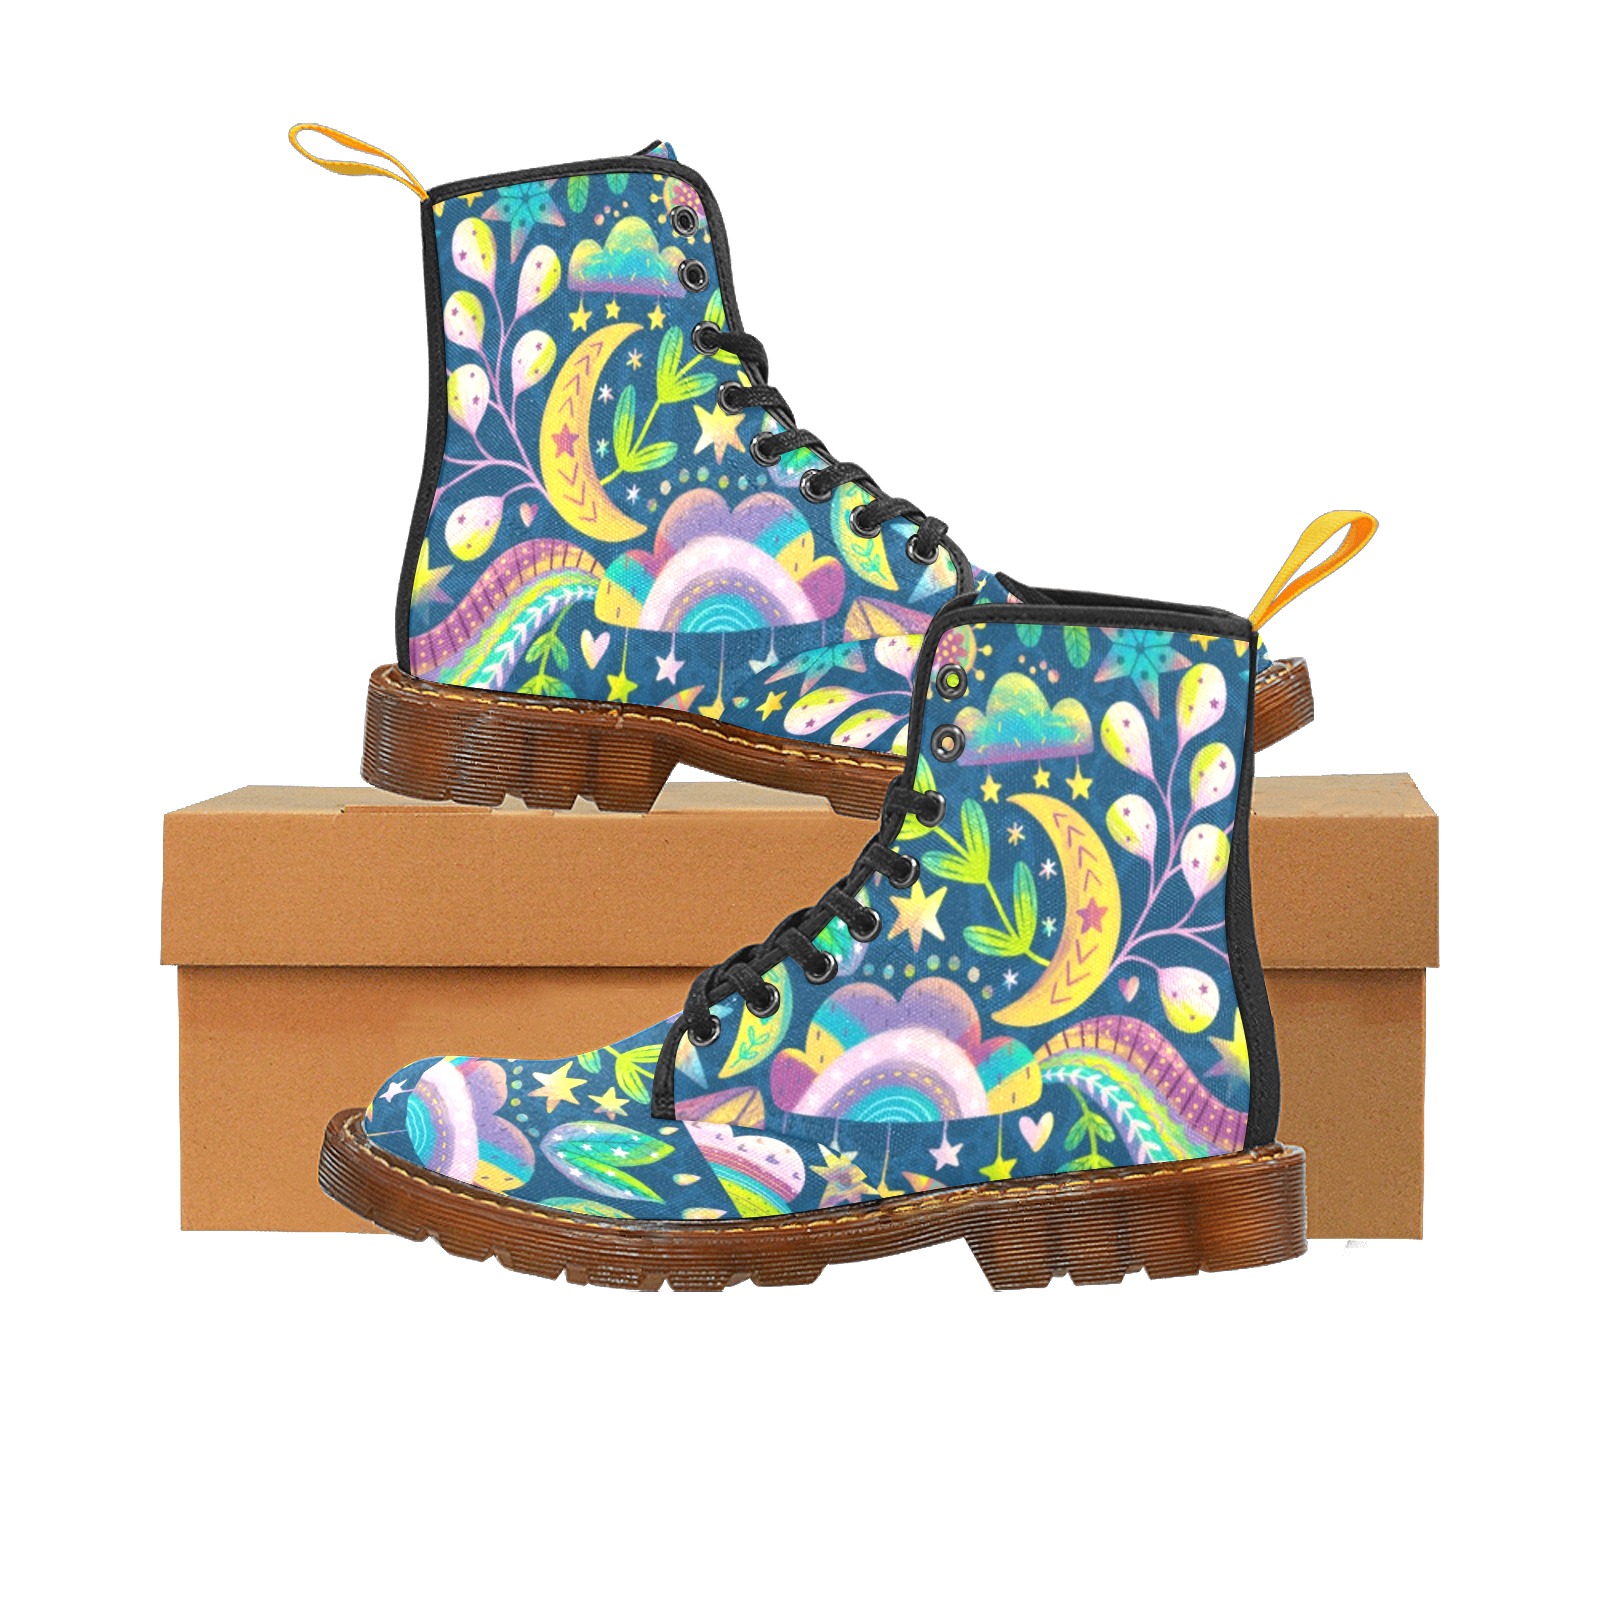 Floral Night Martin Boots For Women Model 1203H